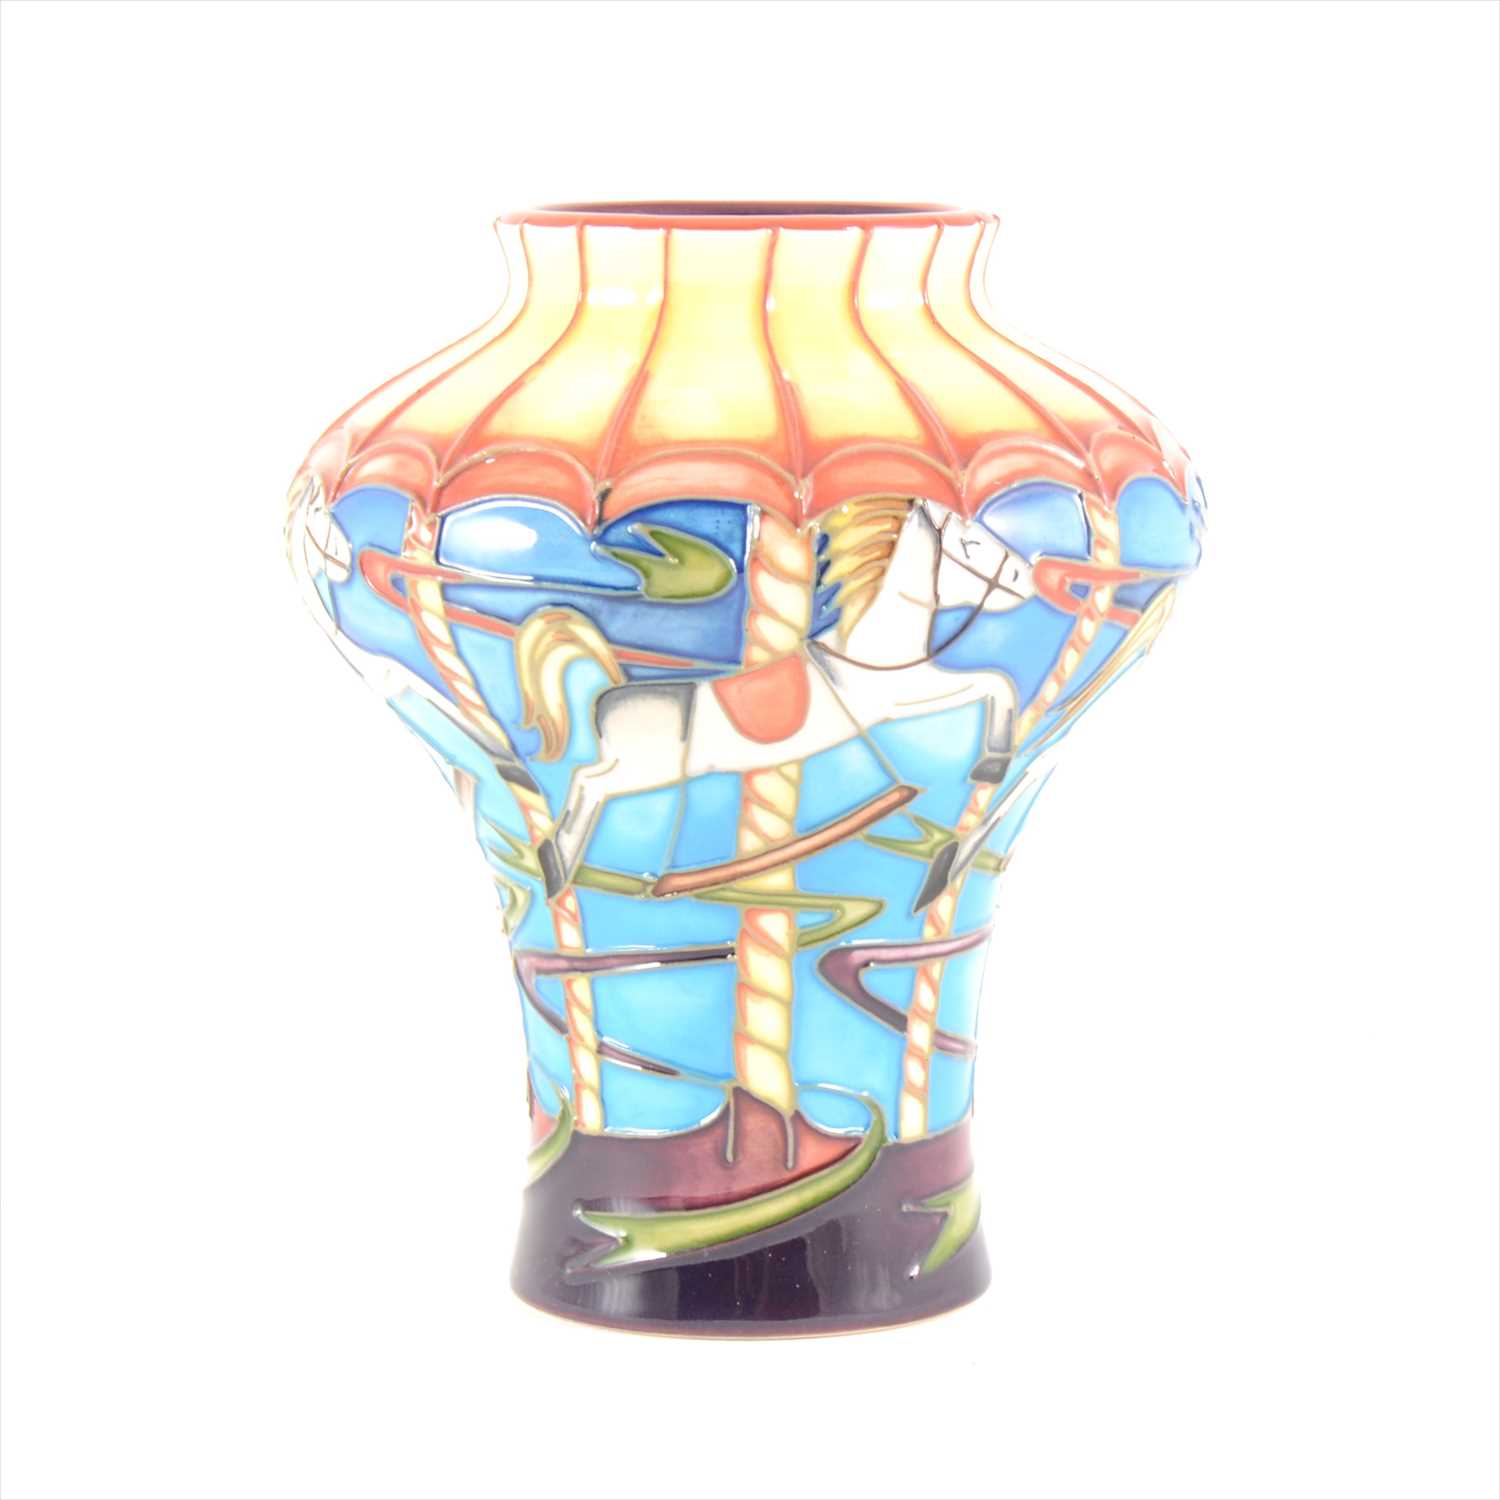 Lot 43 - A 'Merry-go-Round' limited edition Moorcroft Pottery vase, designed by Emma Bossons